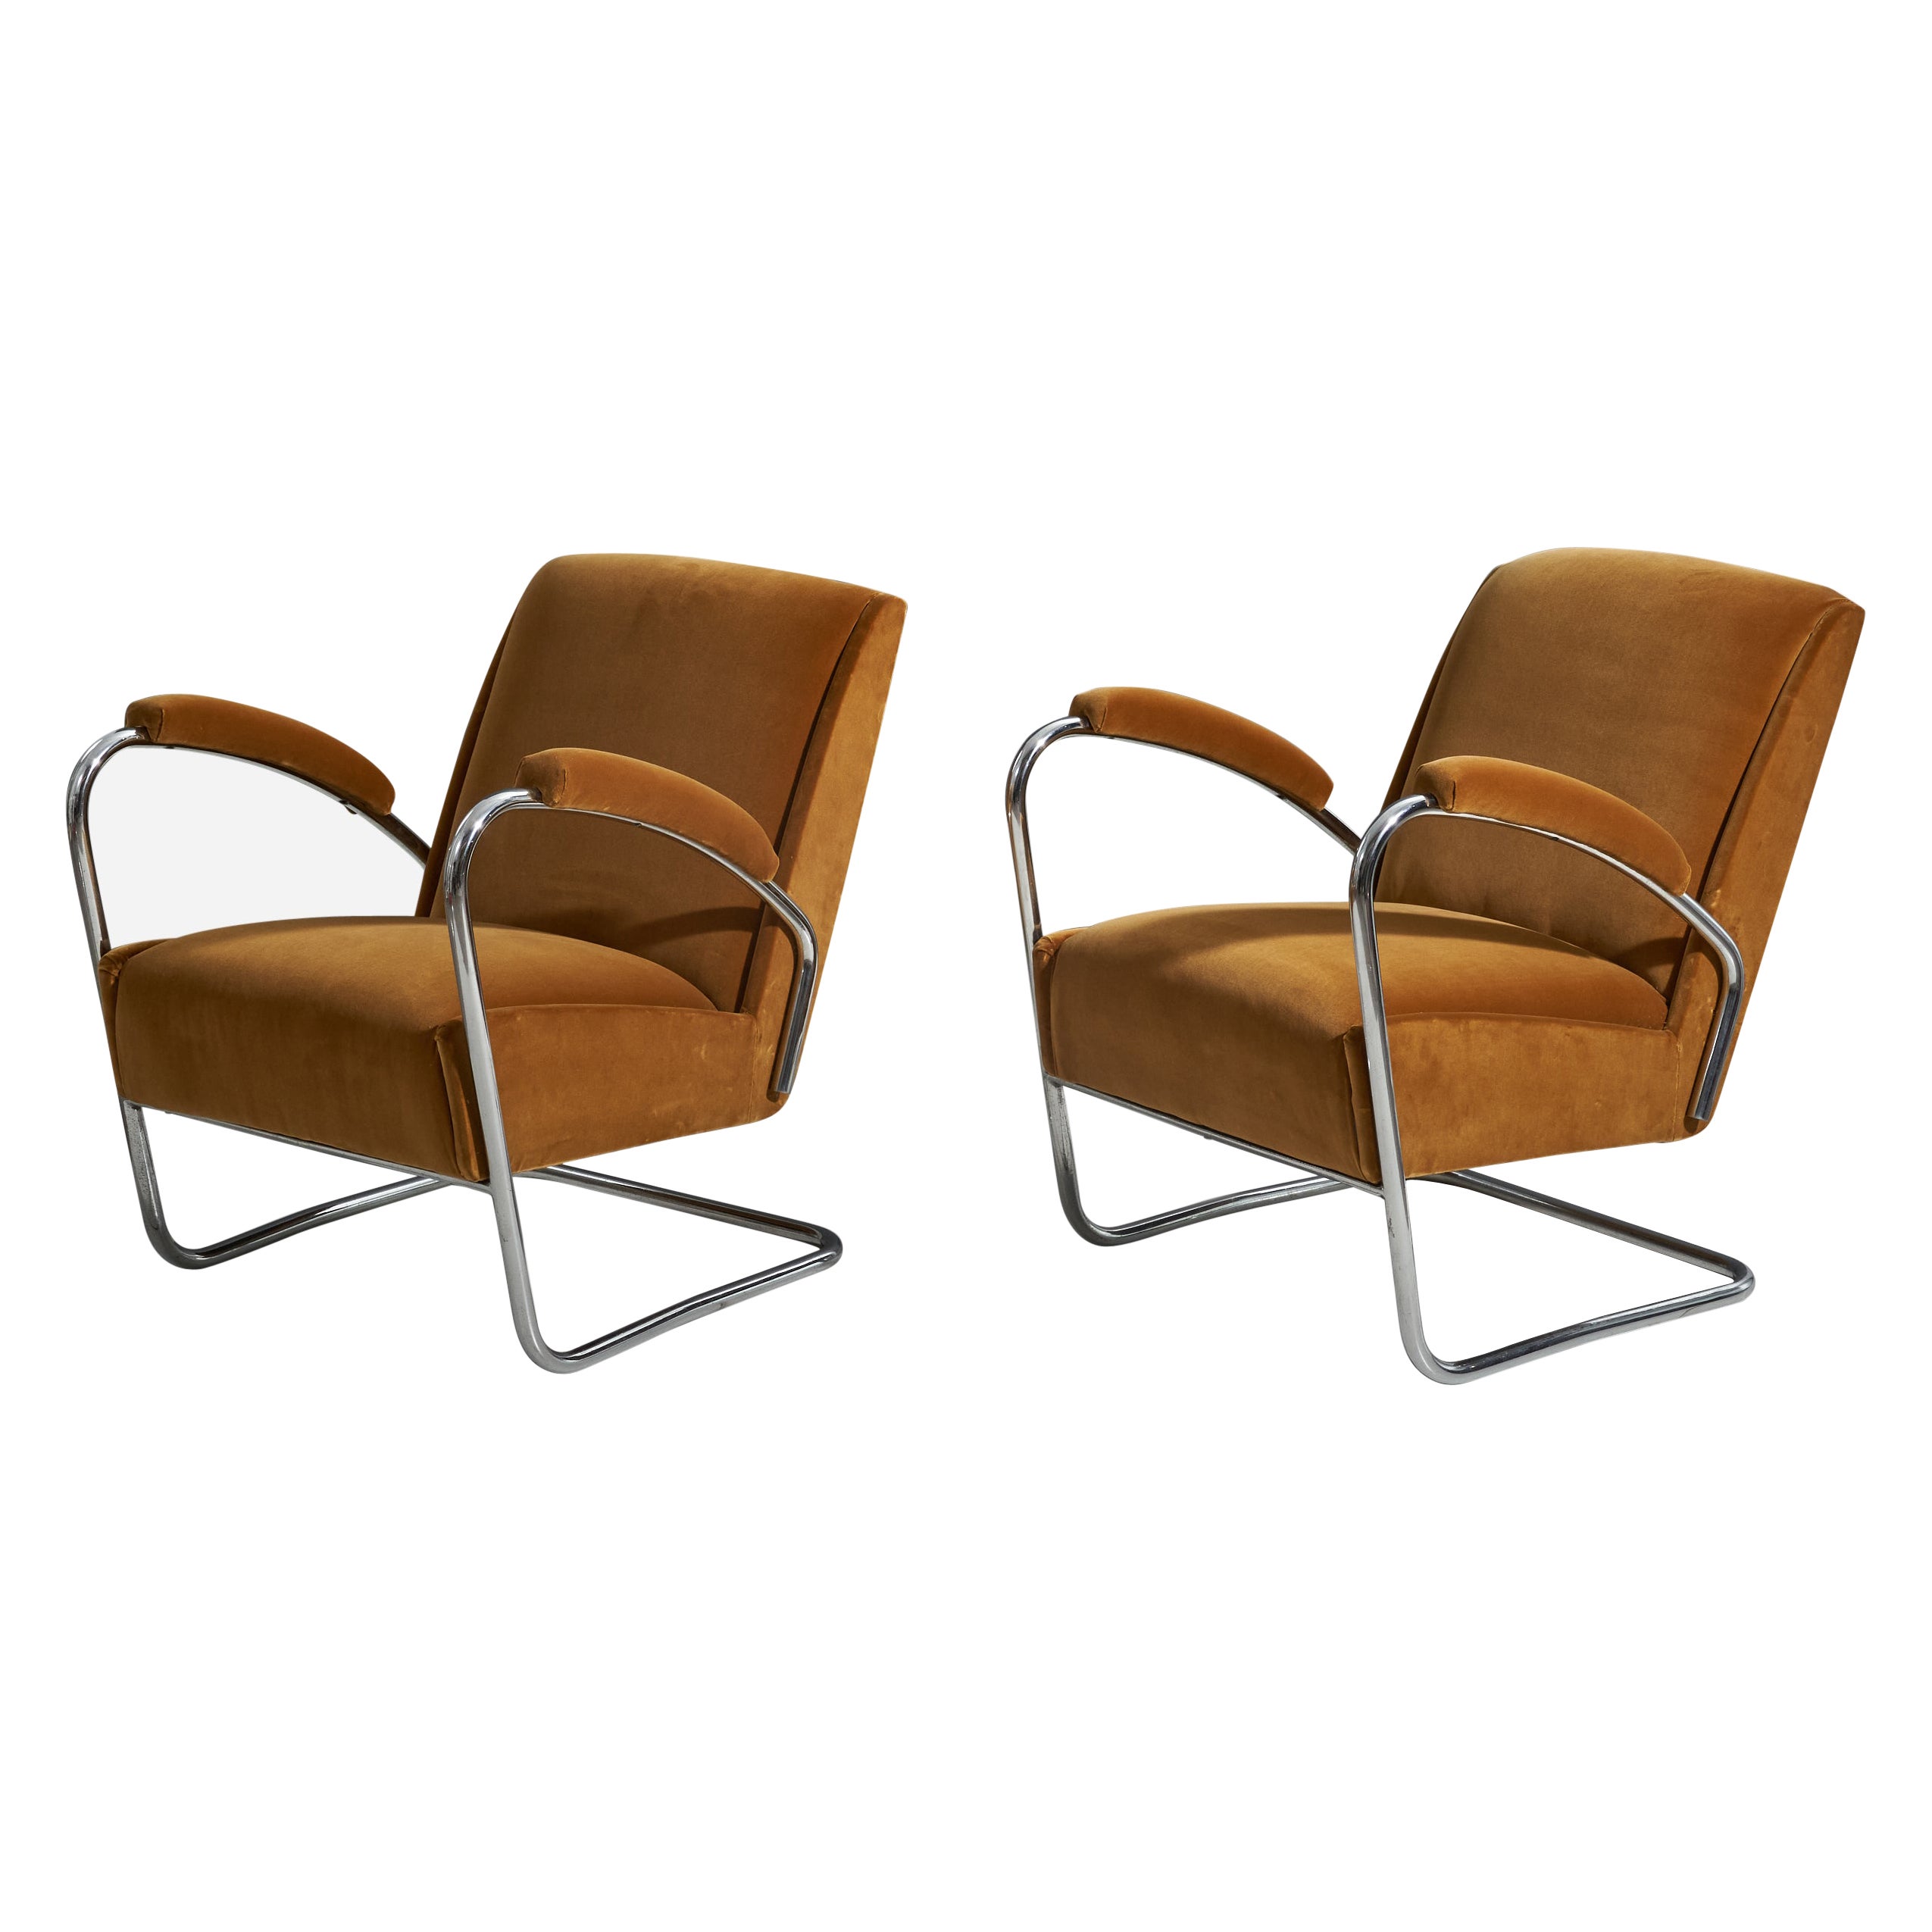 PEL, Lounge Chairs, Steel, Brown / Yellow Velvet, England, 1930s For Sale